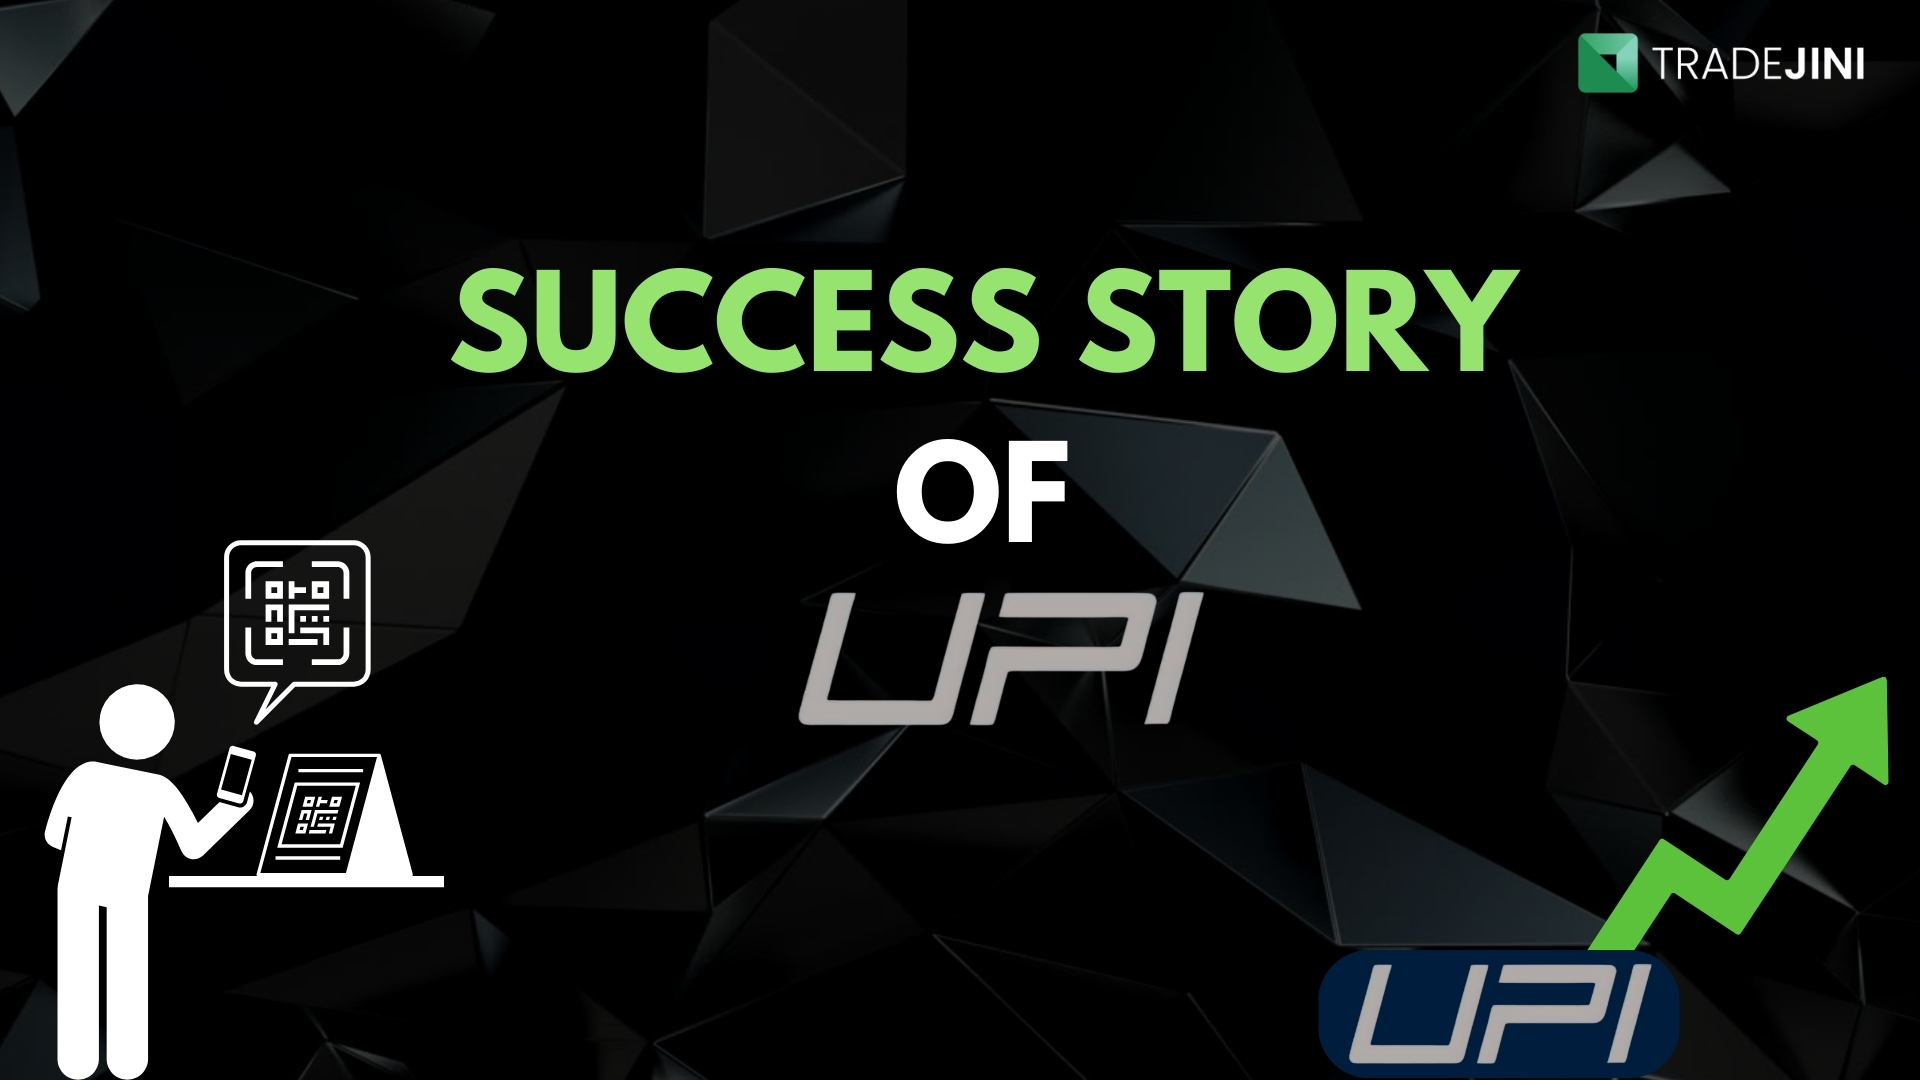 Read more about the article India's financial transactions have entered a new era thanks to the UPI, which has transformed the country's payment practices and greatly boosted its digital economy.